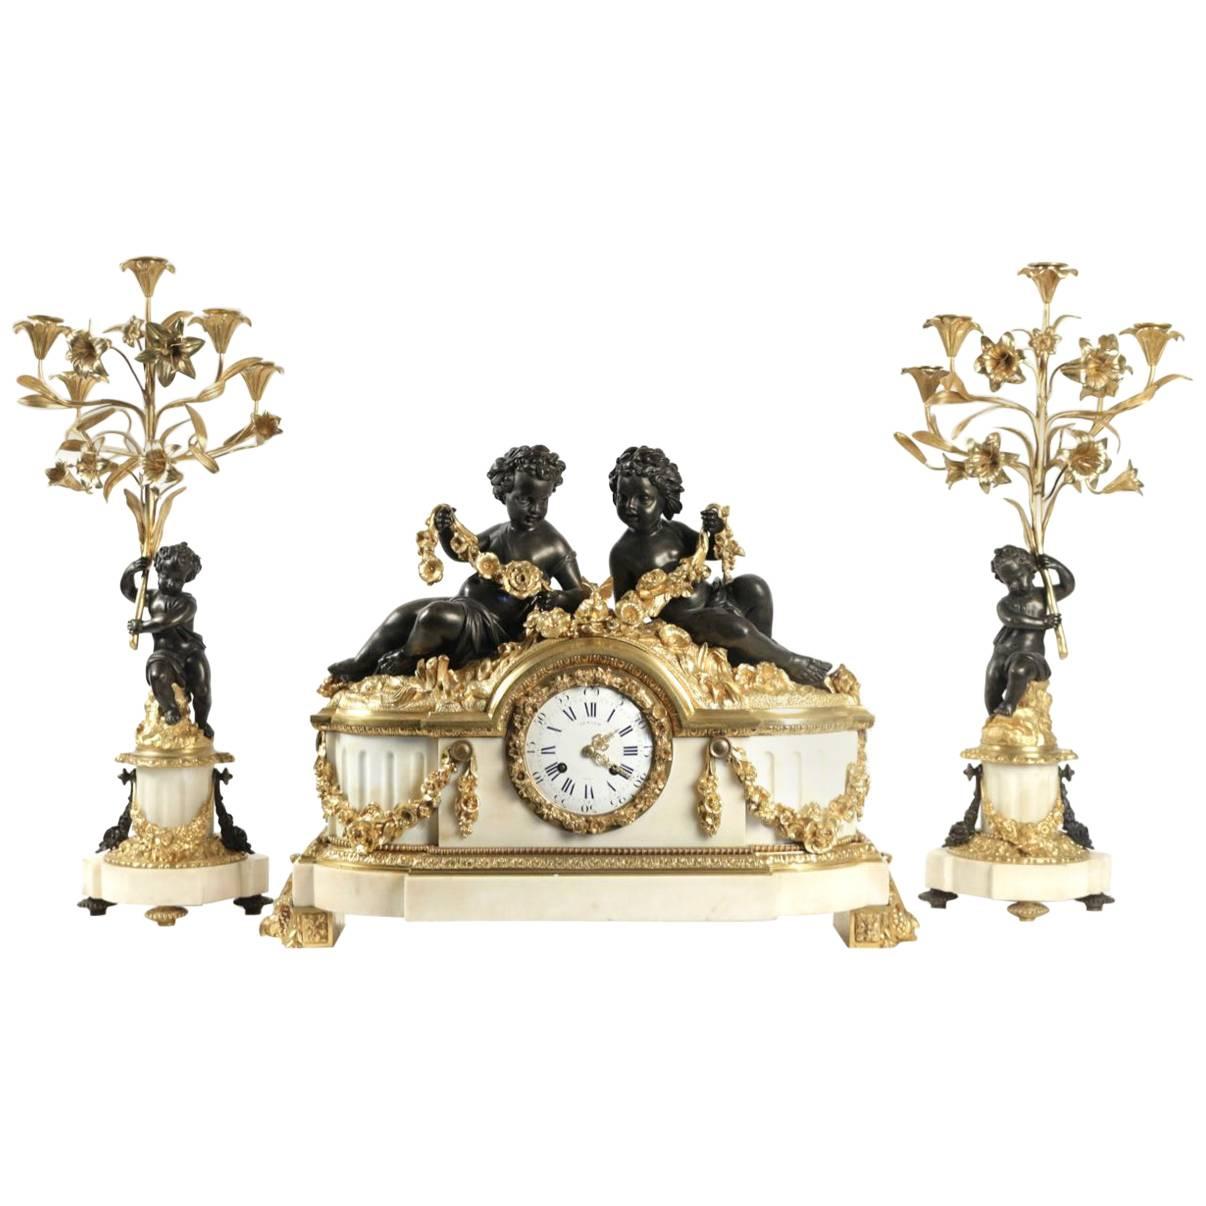 Important Mantle Clock with Matching Candelabras